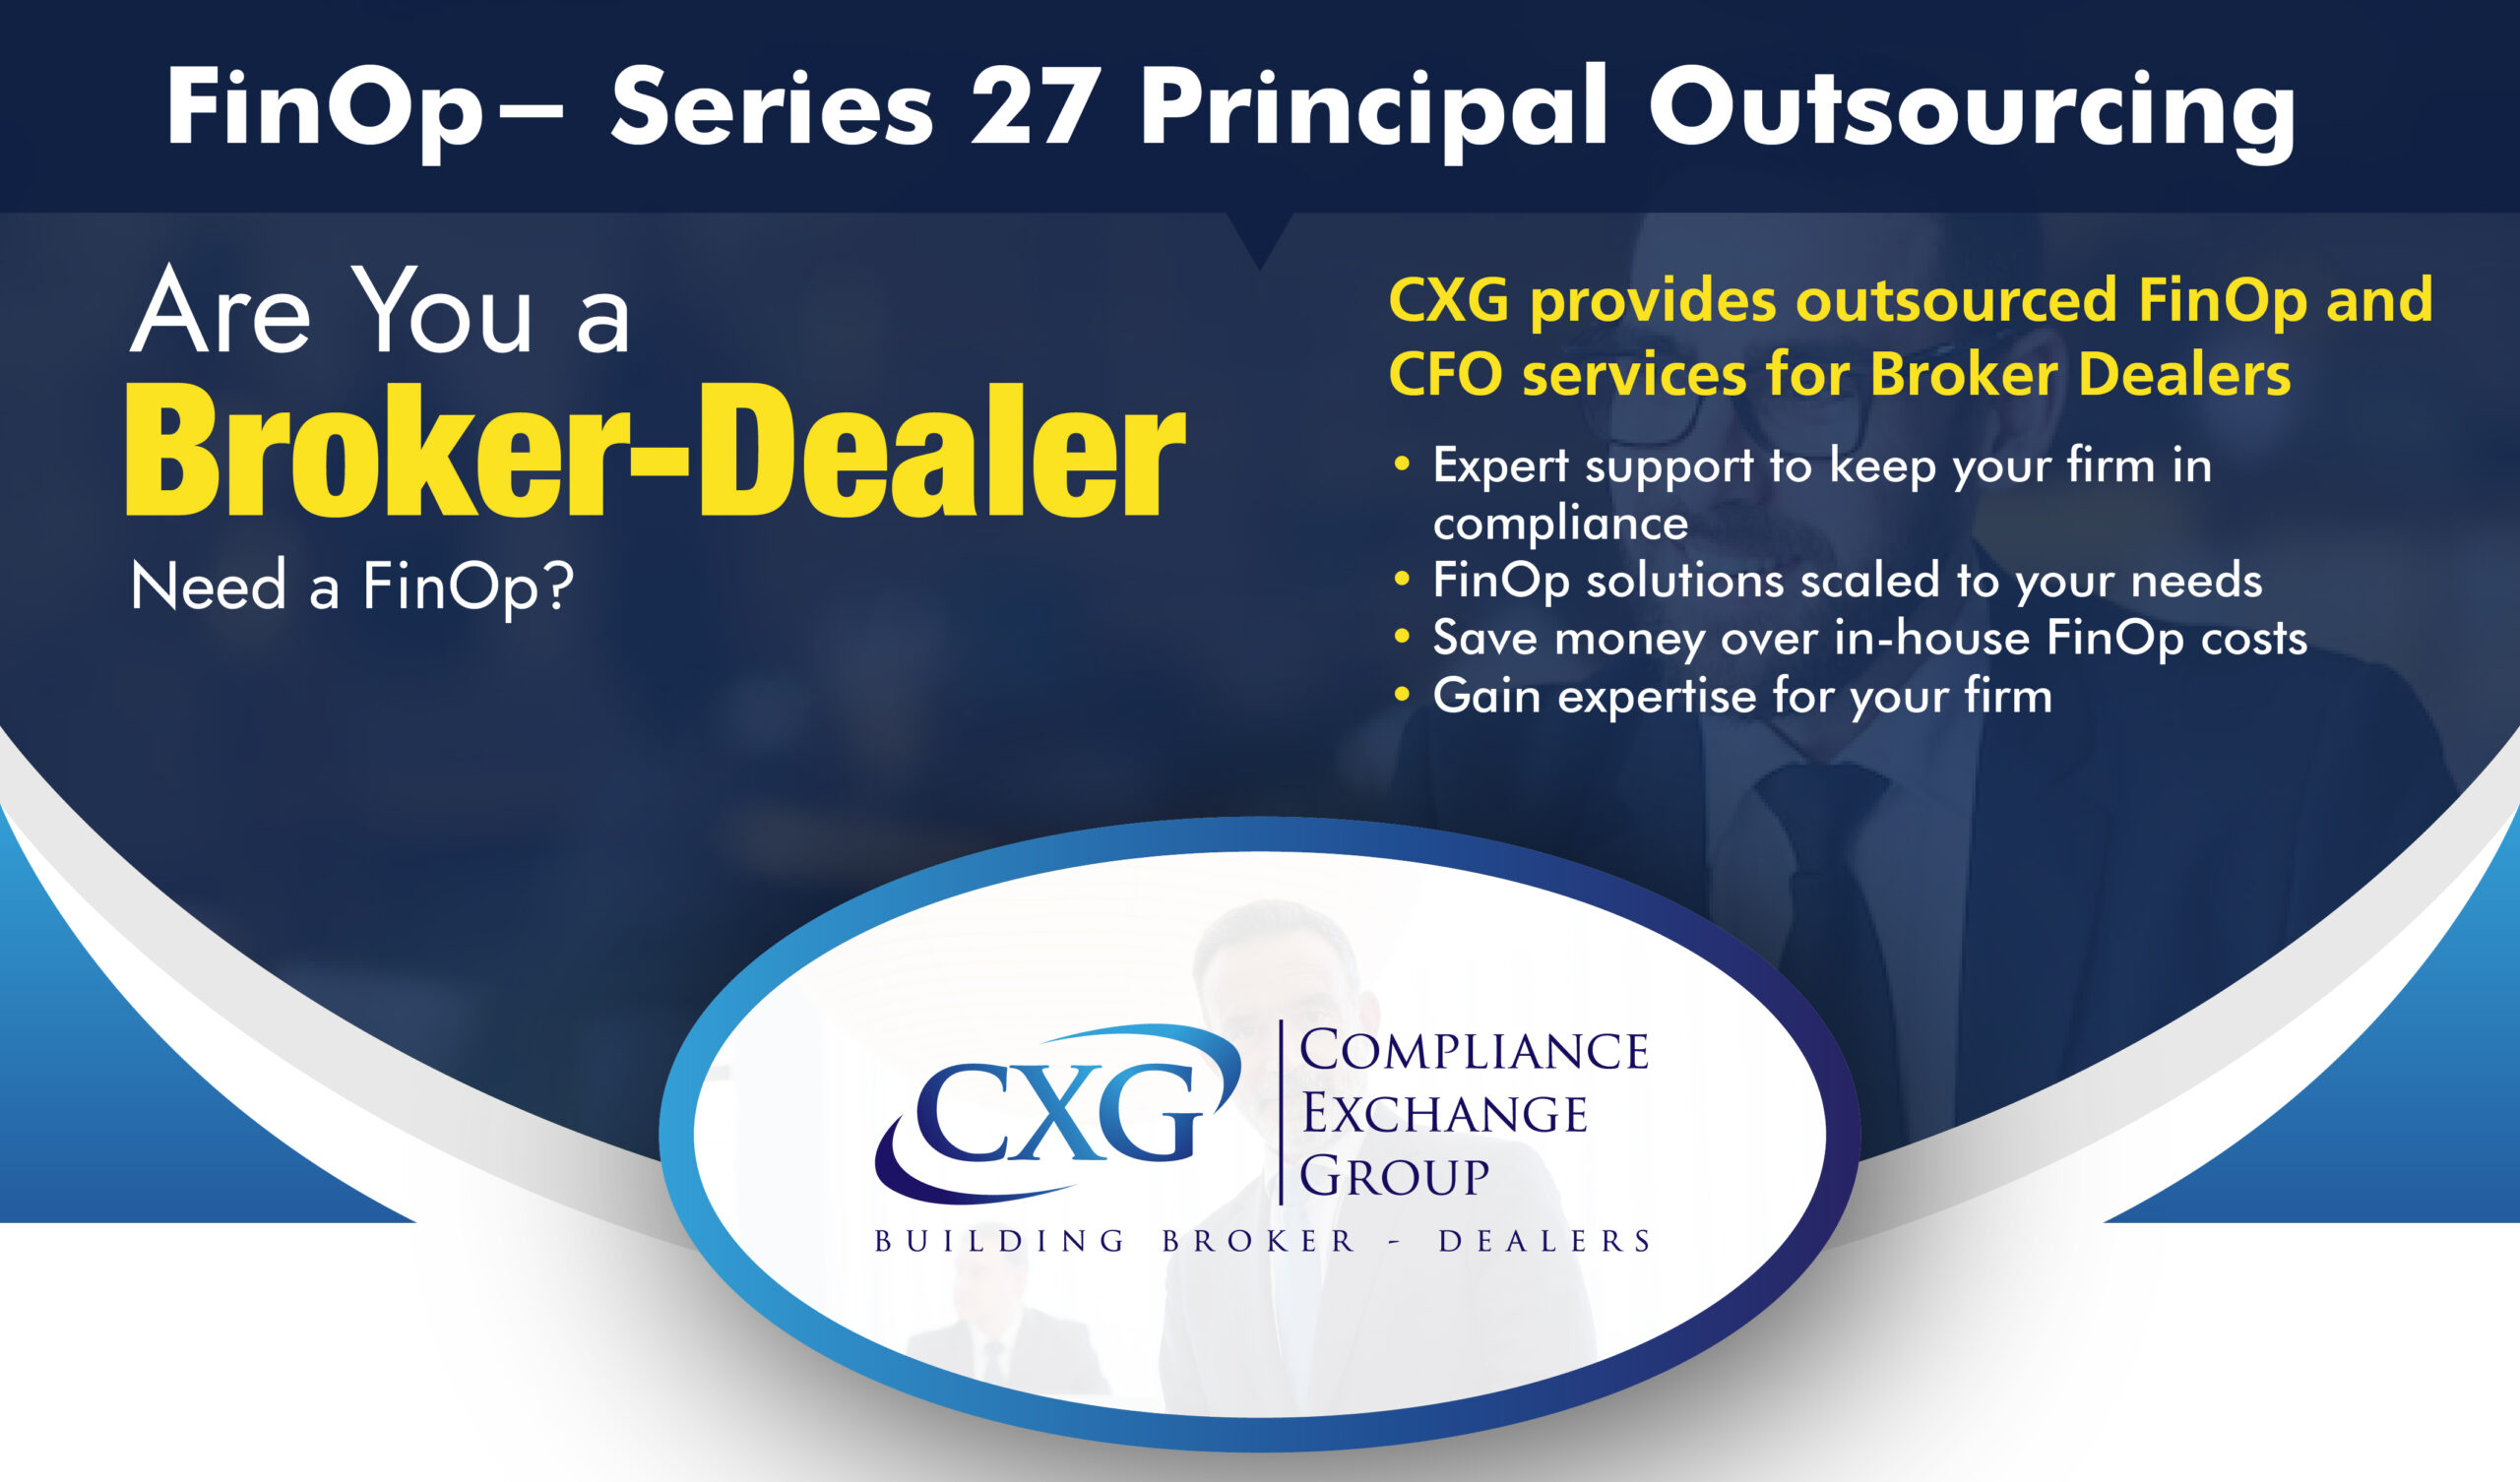 Outsourced FinOP Services | Broker Dealer FinOP - Series 27 Principal | Compliance Exchange Group